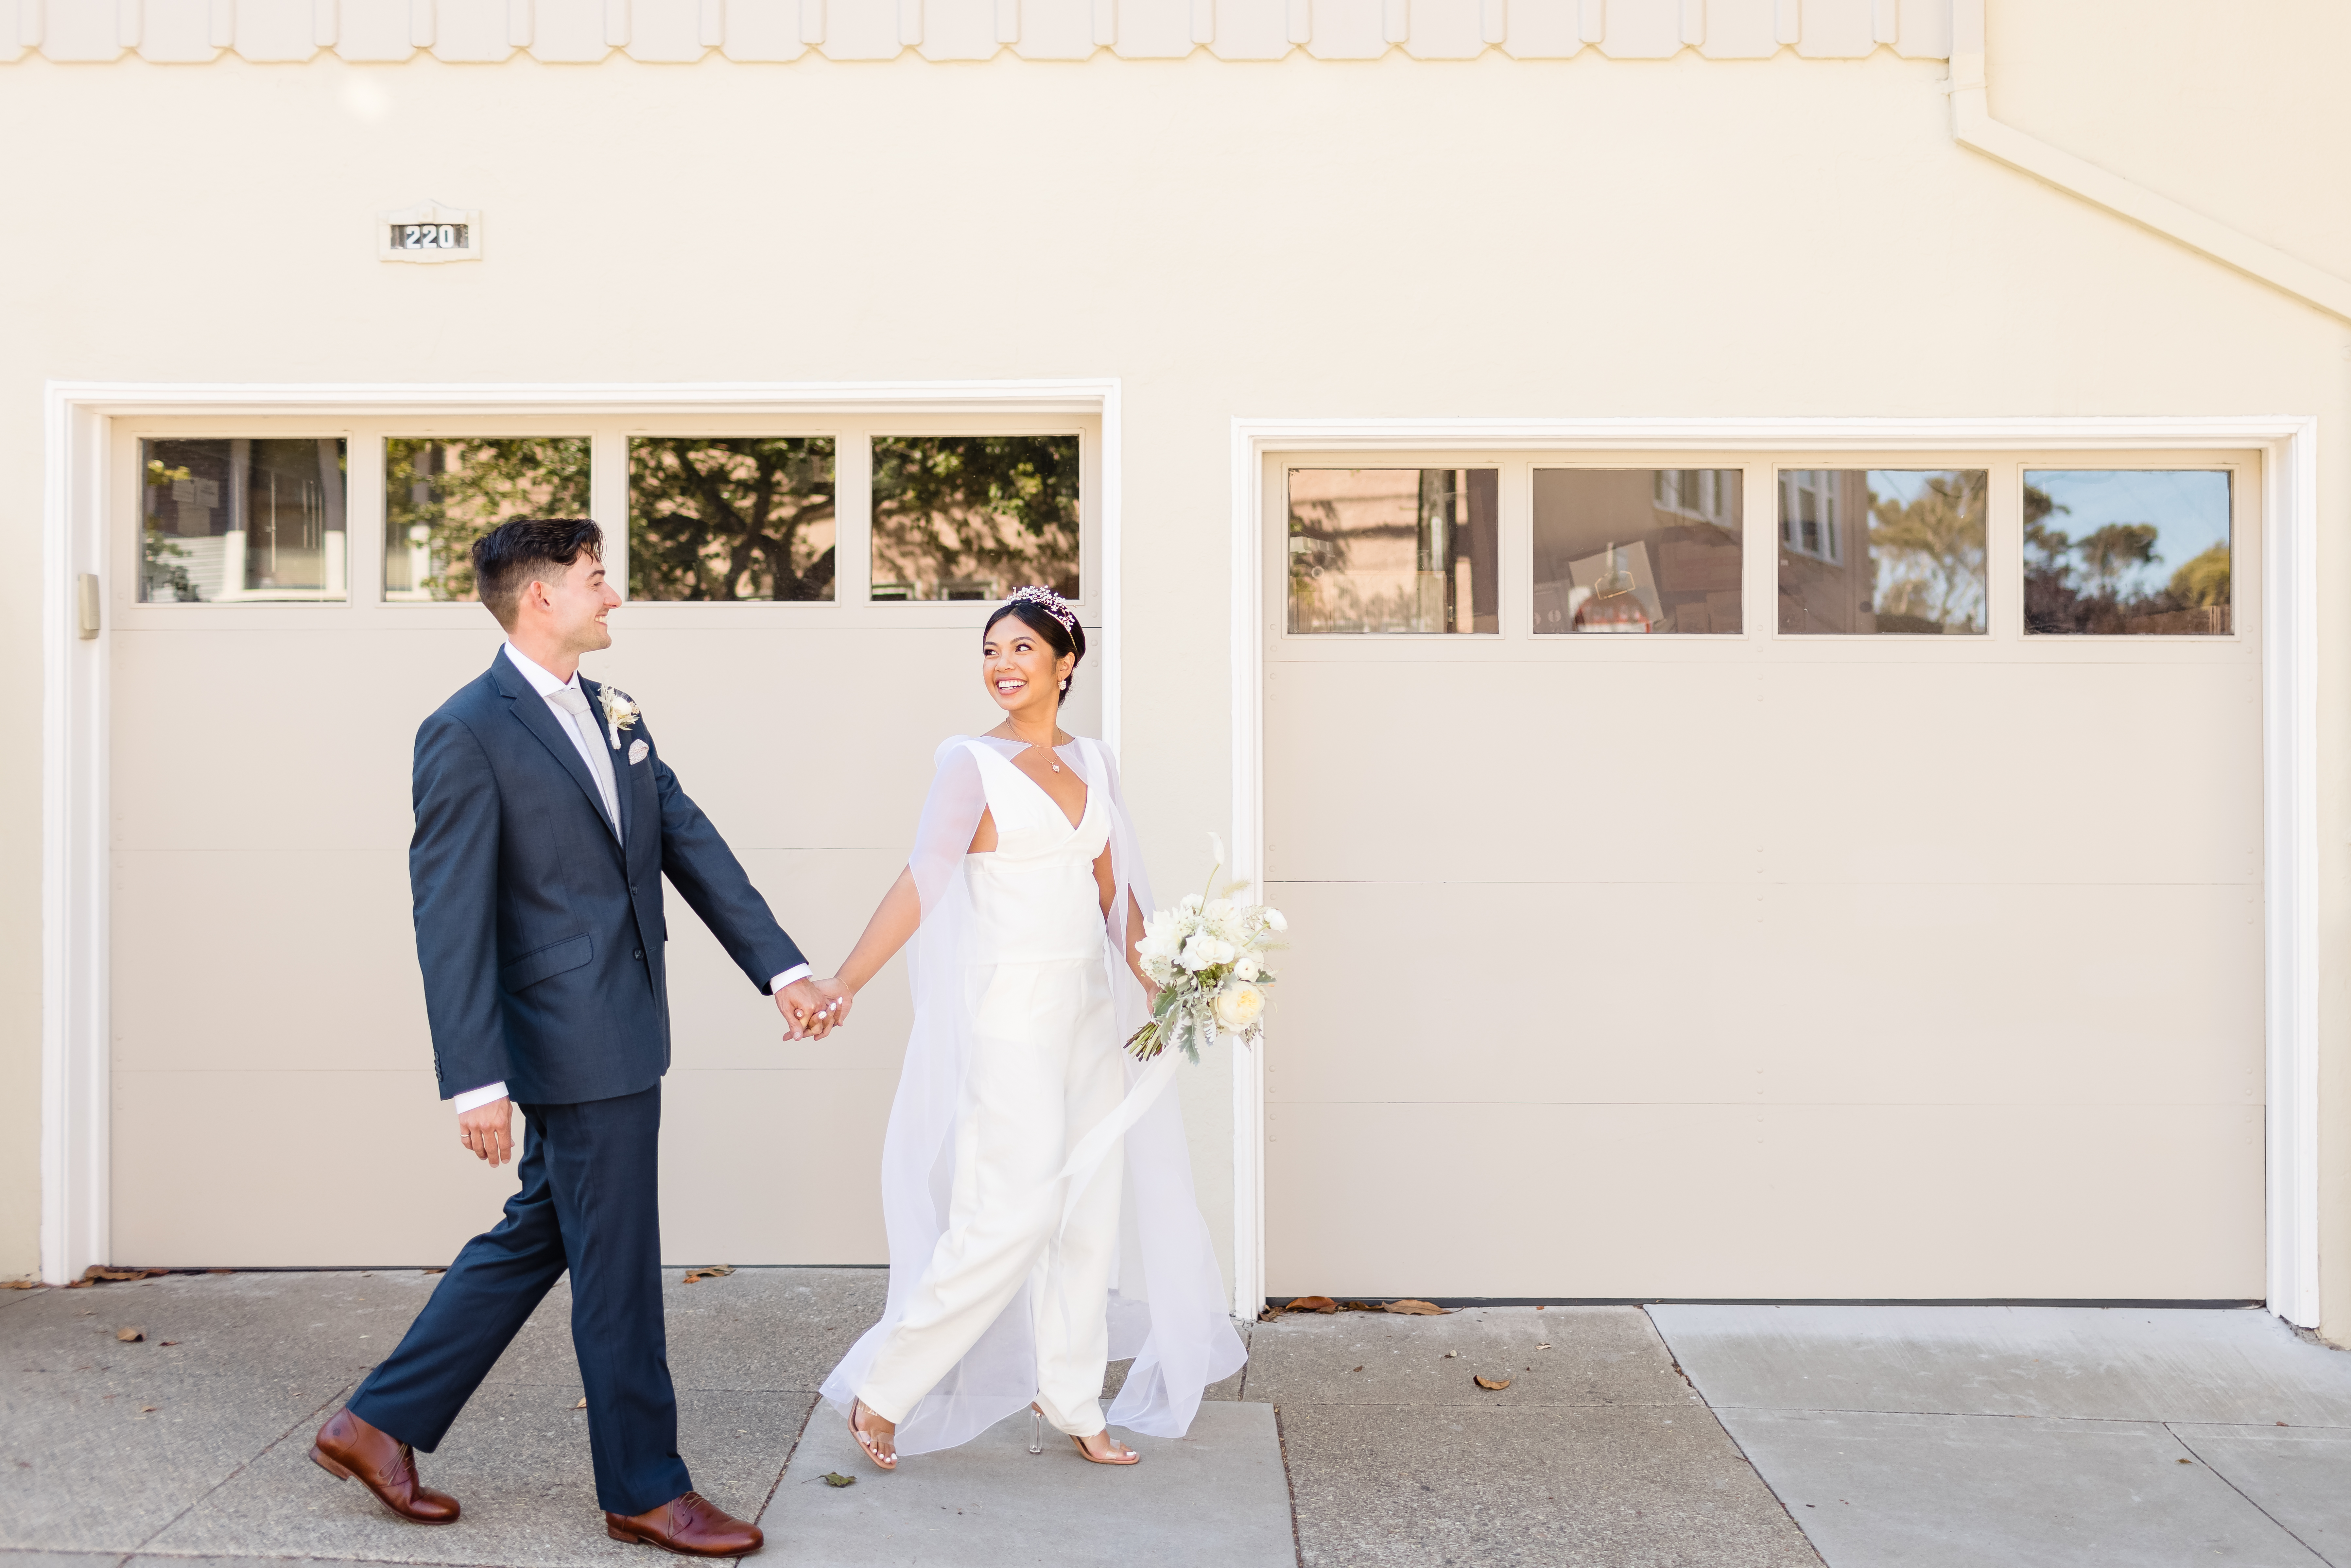 Praise & Barry wedding photo walking in front of tan garage holding hands